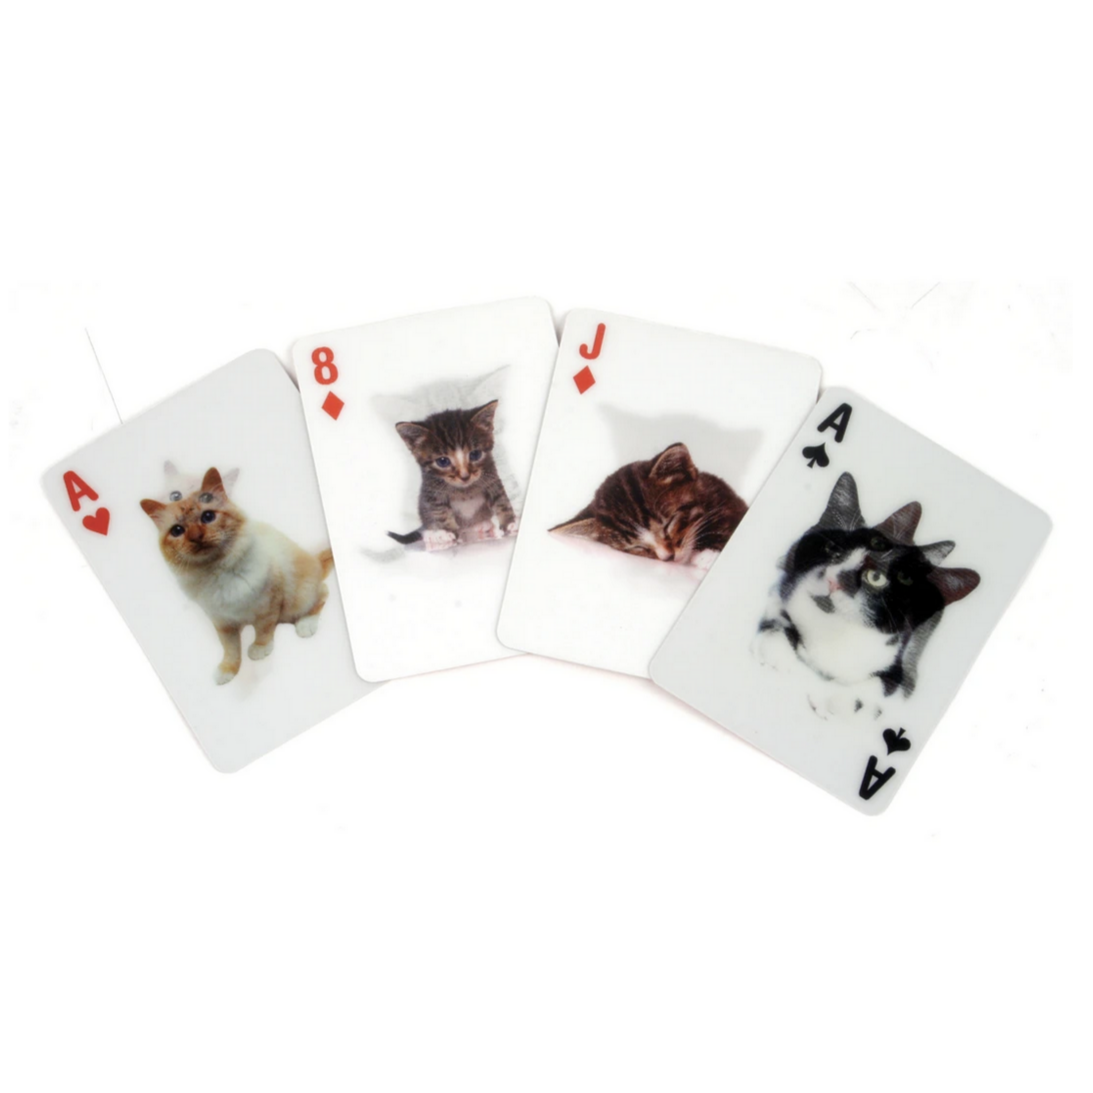 3-D Playing Cards Cats